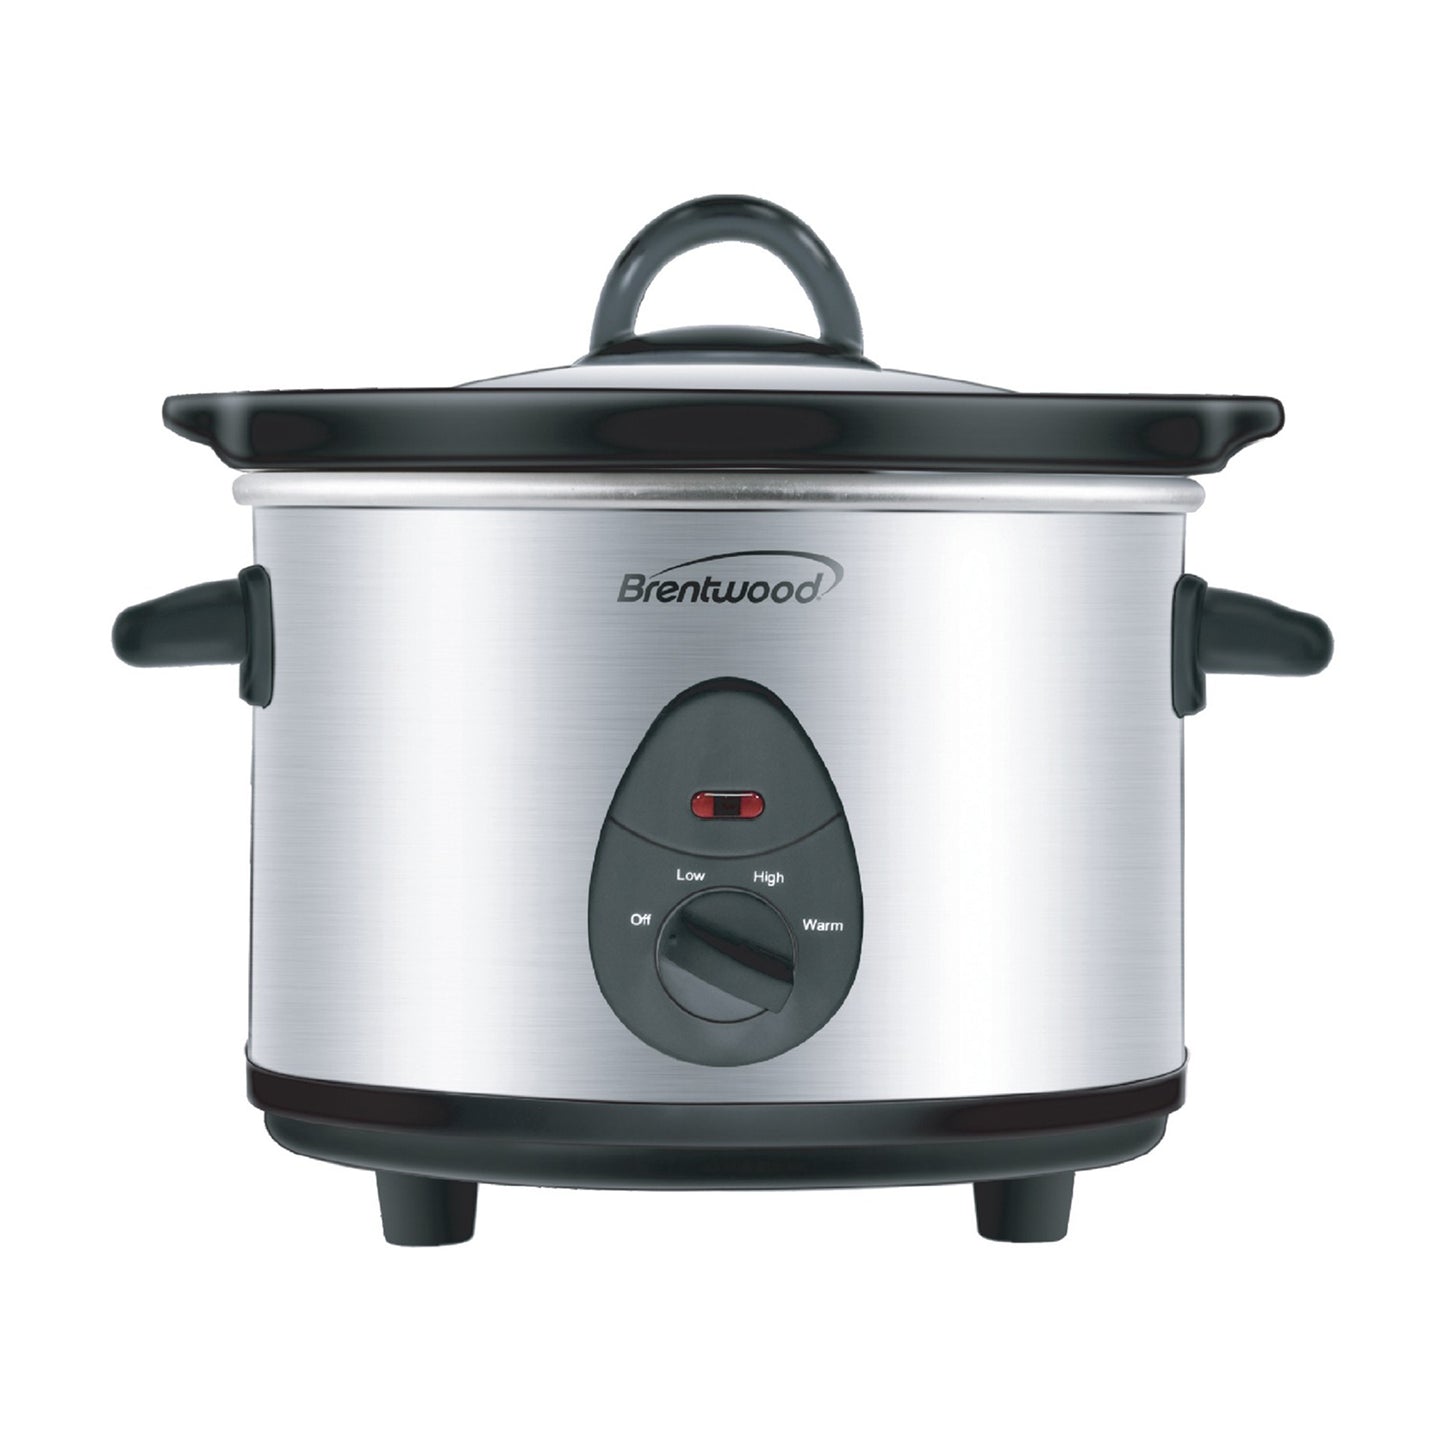 Brentwood Brentwood 1.5 Quart Slow Cooker in Stainless Steel with 3 Settings